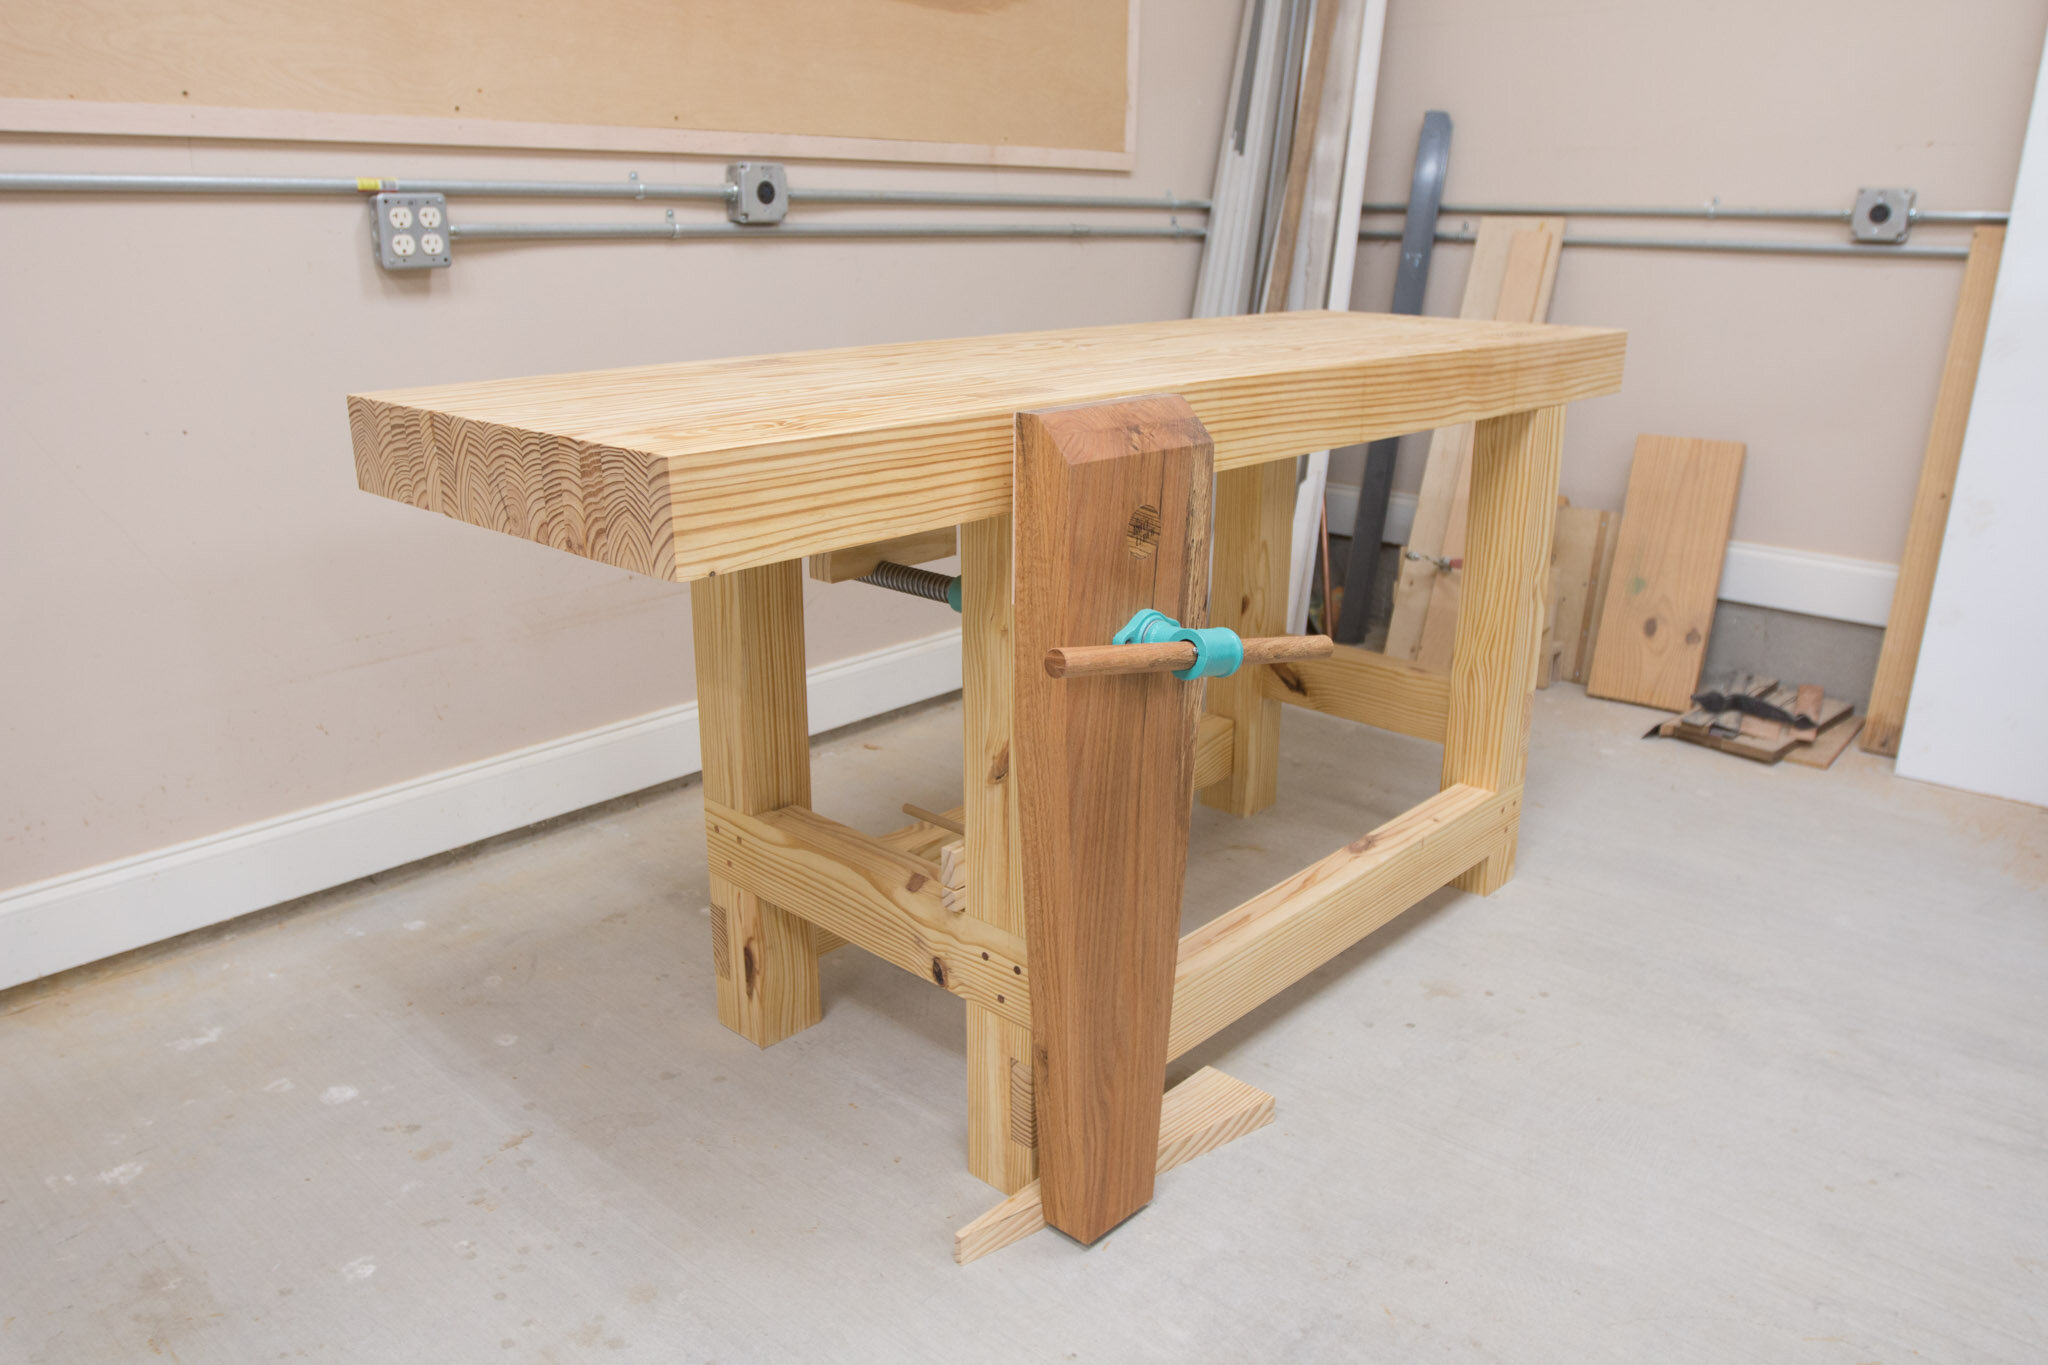 Making And Installing A Leg Vise Bruce A Ulrich